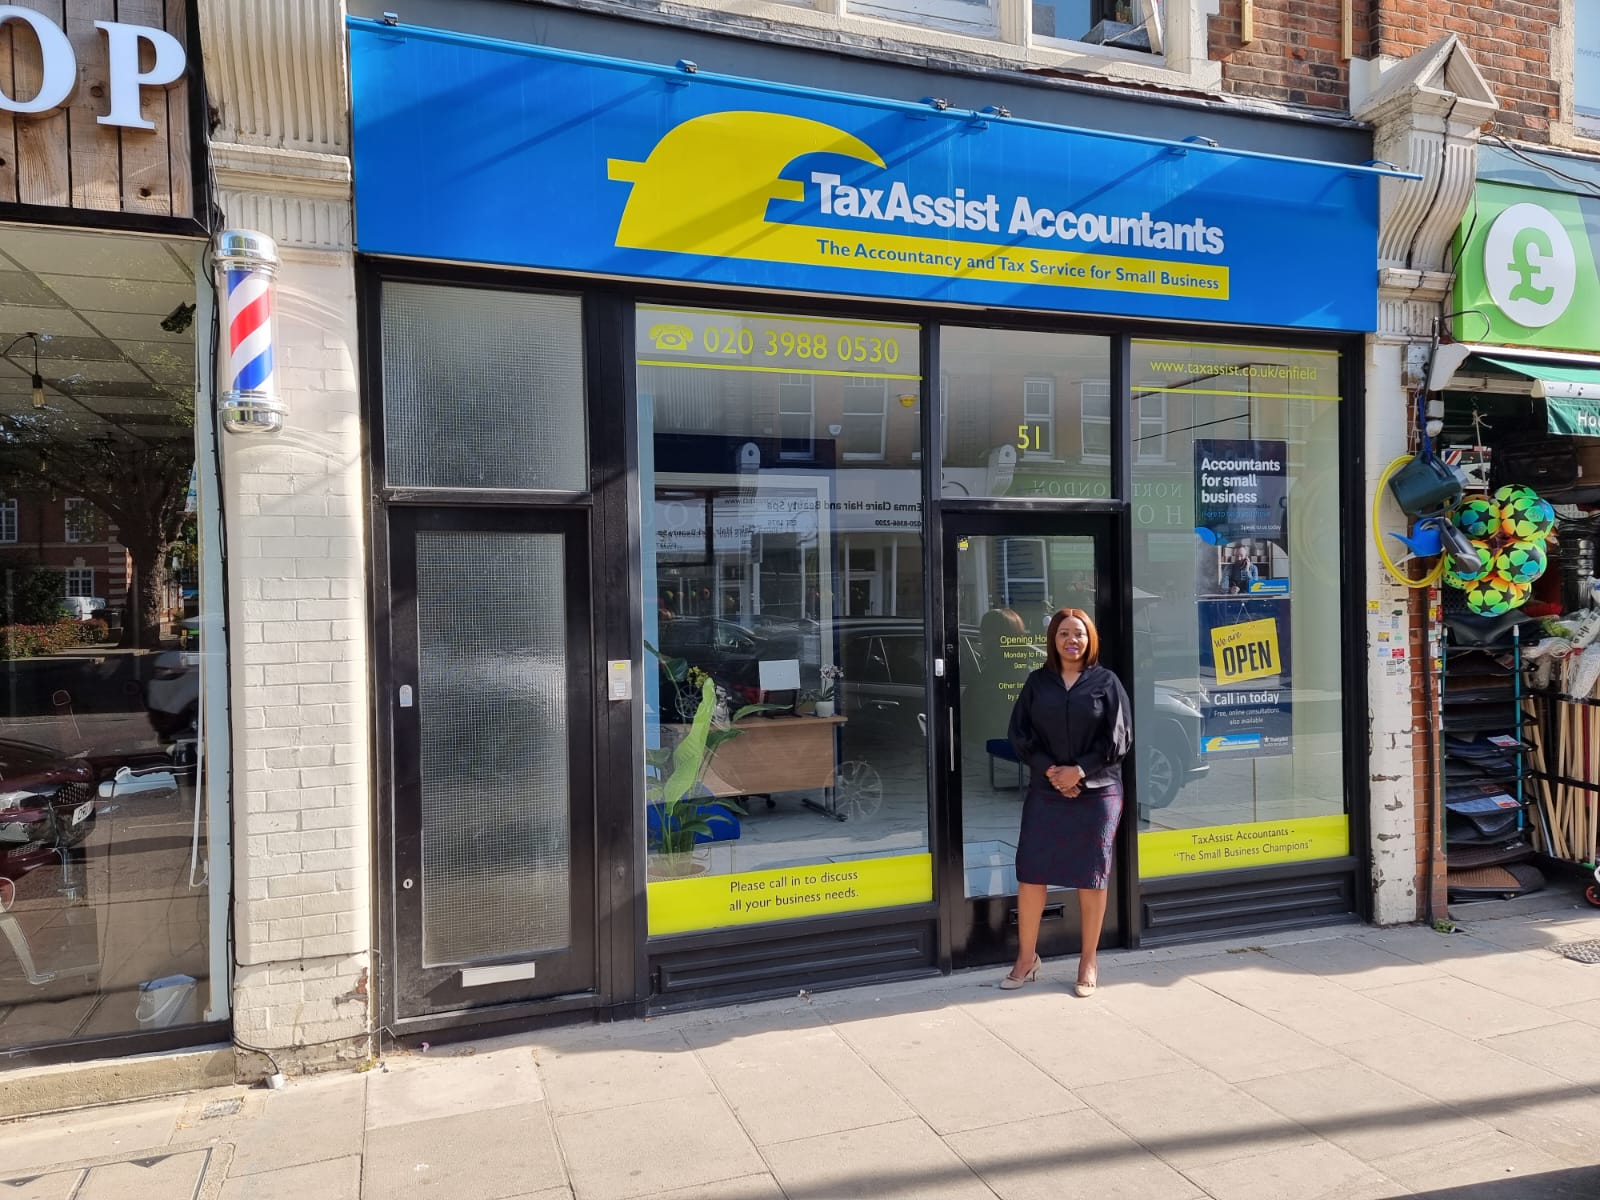 New TaxAssist Accountants shop in Enfield